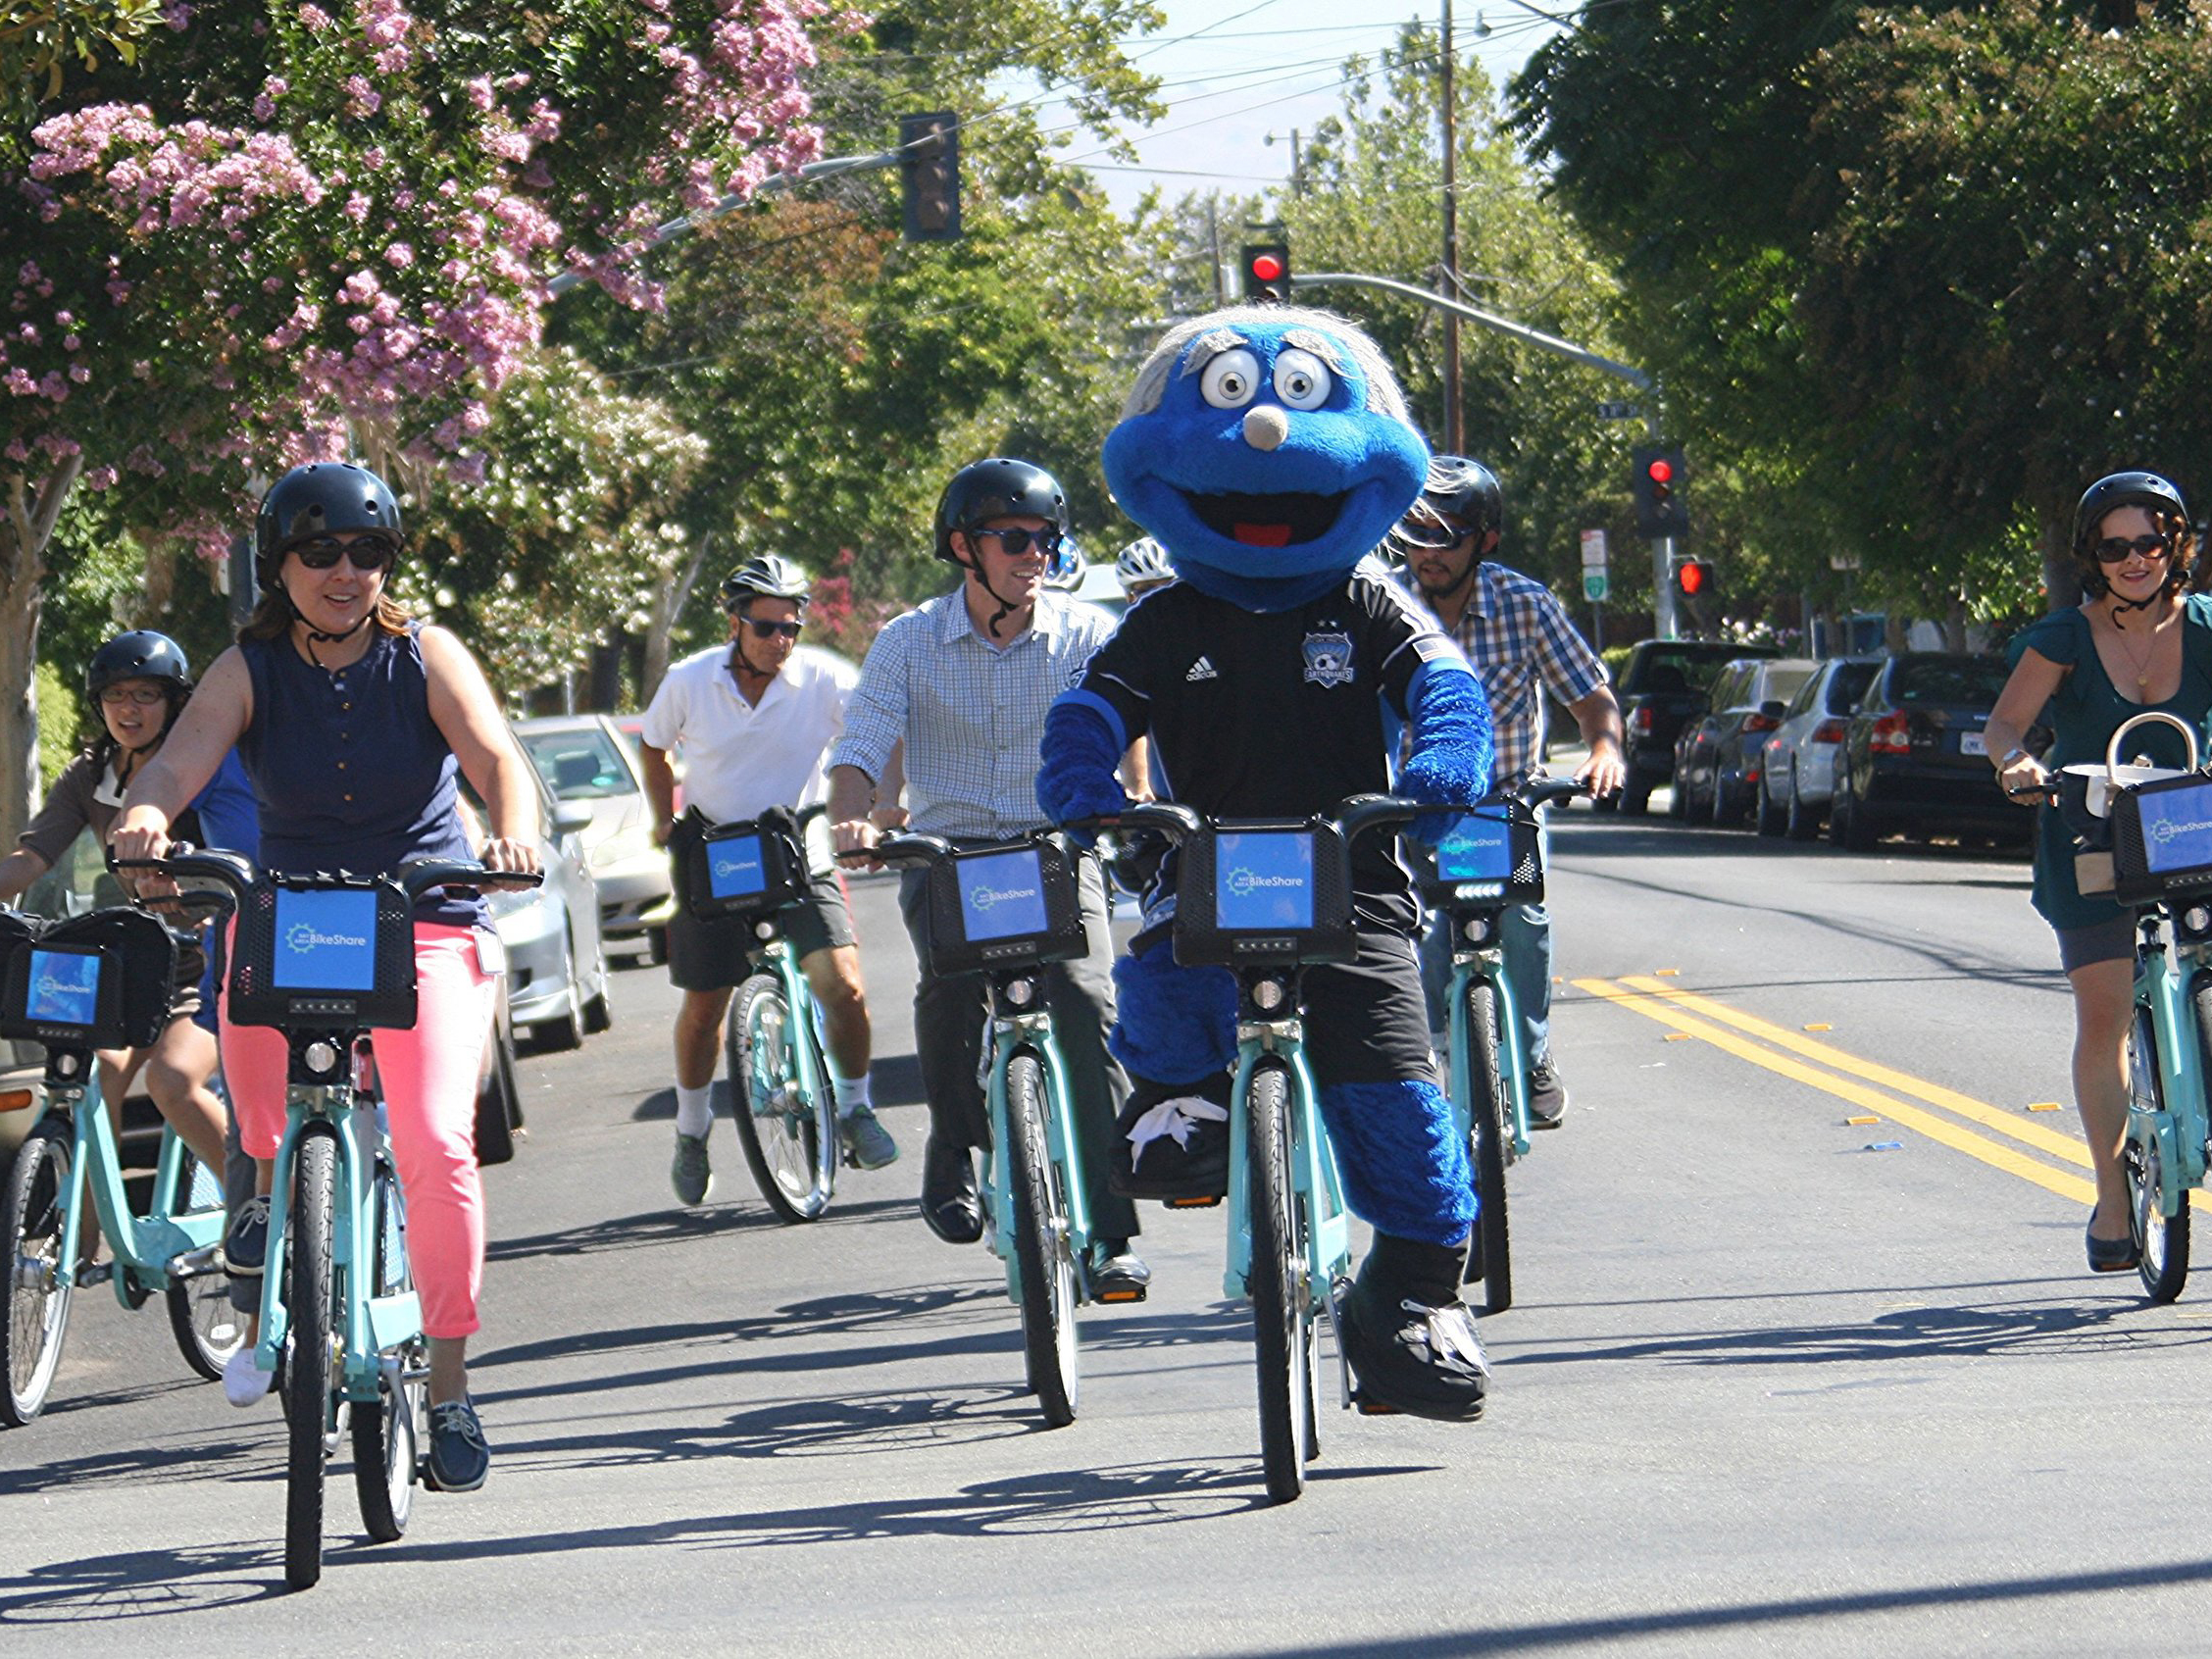 People use share bikes for many reasons, including health benefits and even because they like the design. Image: Richard Masoner/Bay Area Bike Share launch in San Jose CA/Flickr, CC BY
